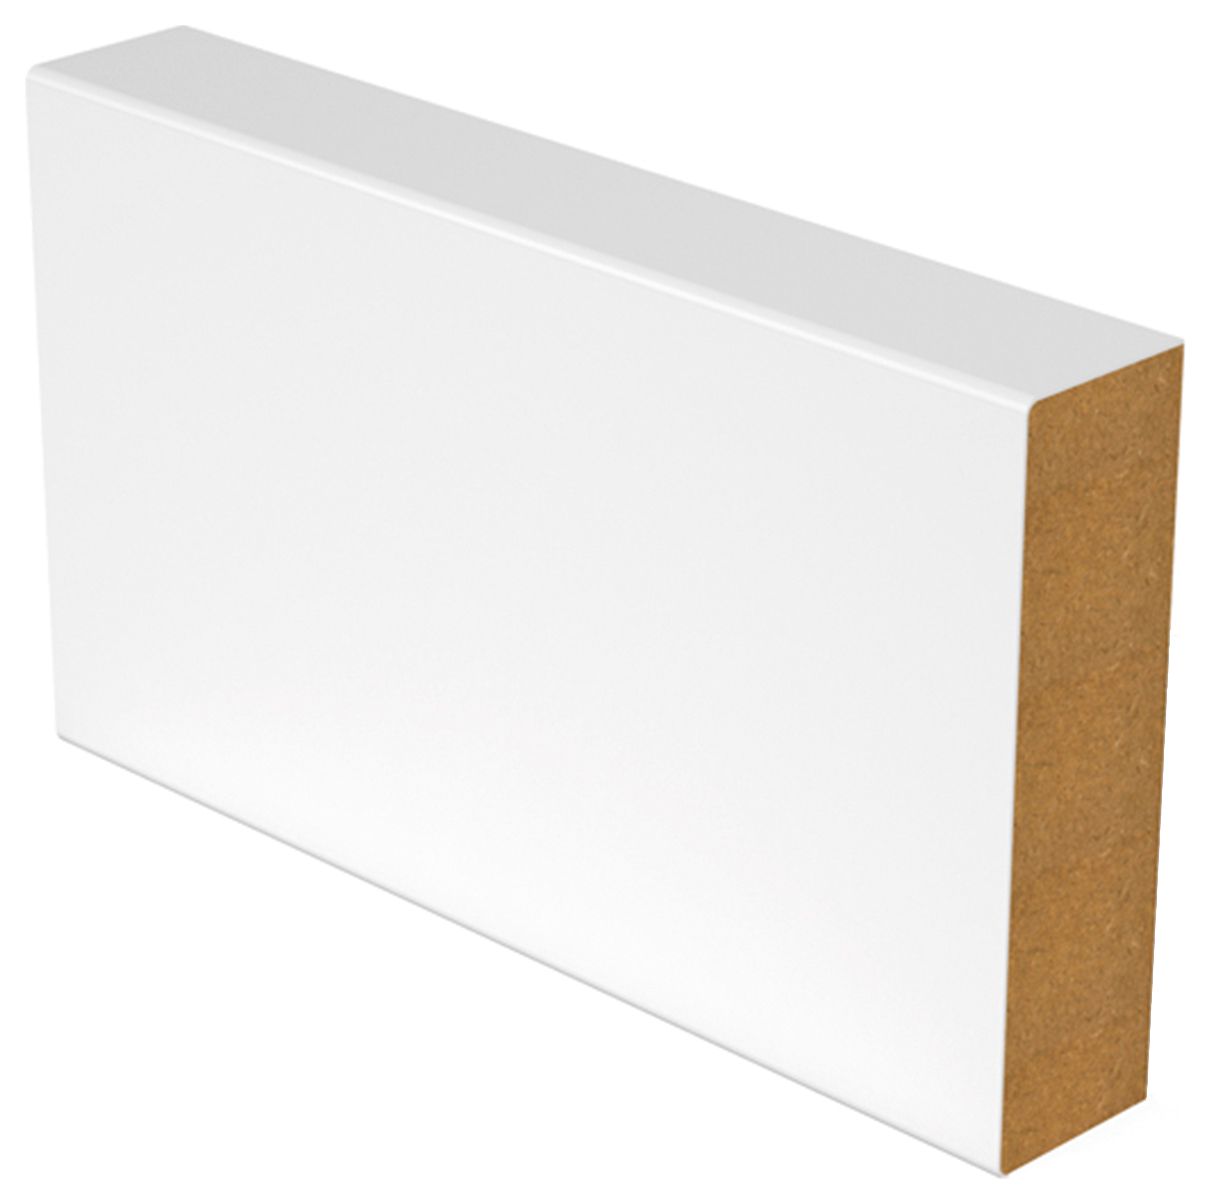 Image of Wickes Square Edge White MDF Skirting - 18 x 119 x 4200mm